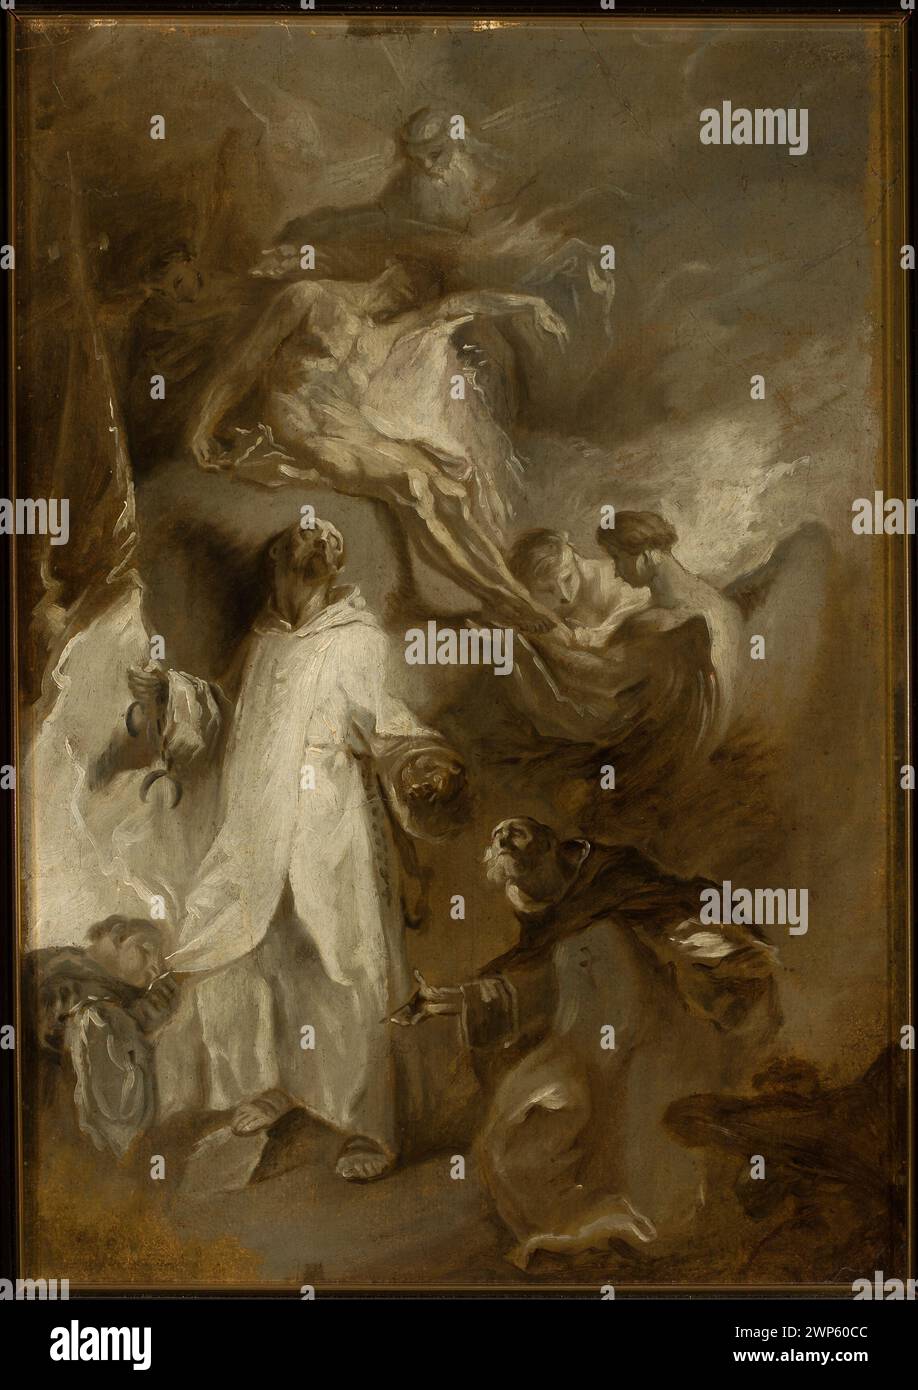 Felix Walery and Jan from Mathy at the feet of the Trinity; unknown, Maulbertsch, Franz Anton (1724-1796); 18th century (1701-00-00-1800-00-00);Feliks Walezy (St. - 1127-1212), Holy Trinity (iconogr.), Austrian painting, religious painting, religious scenes, saints Stock Photo